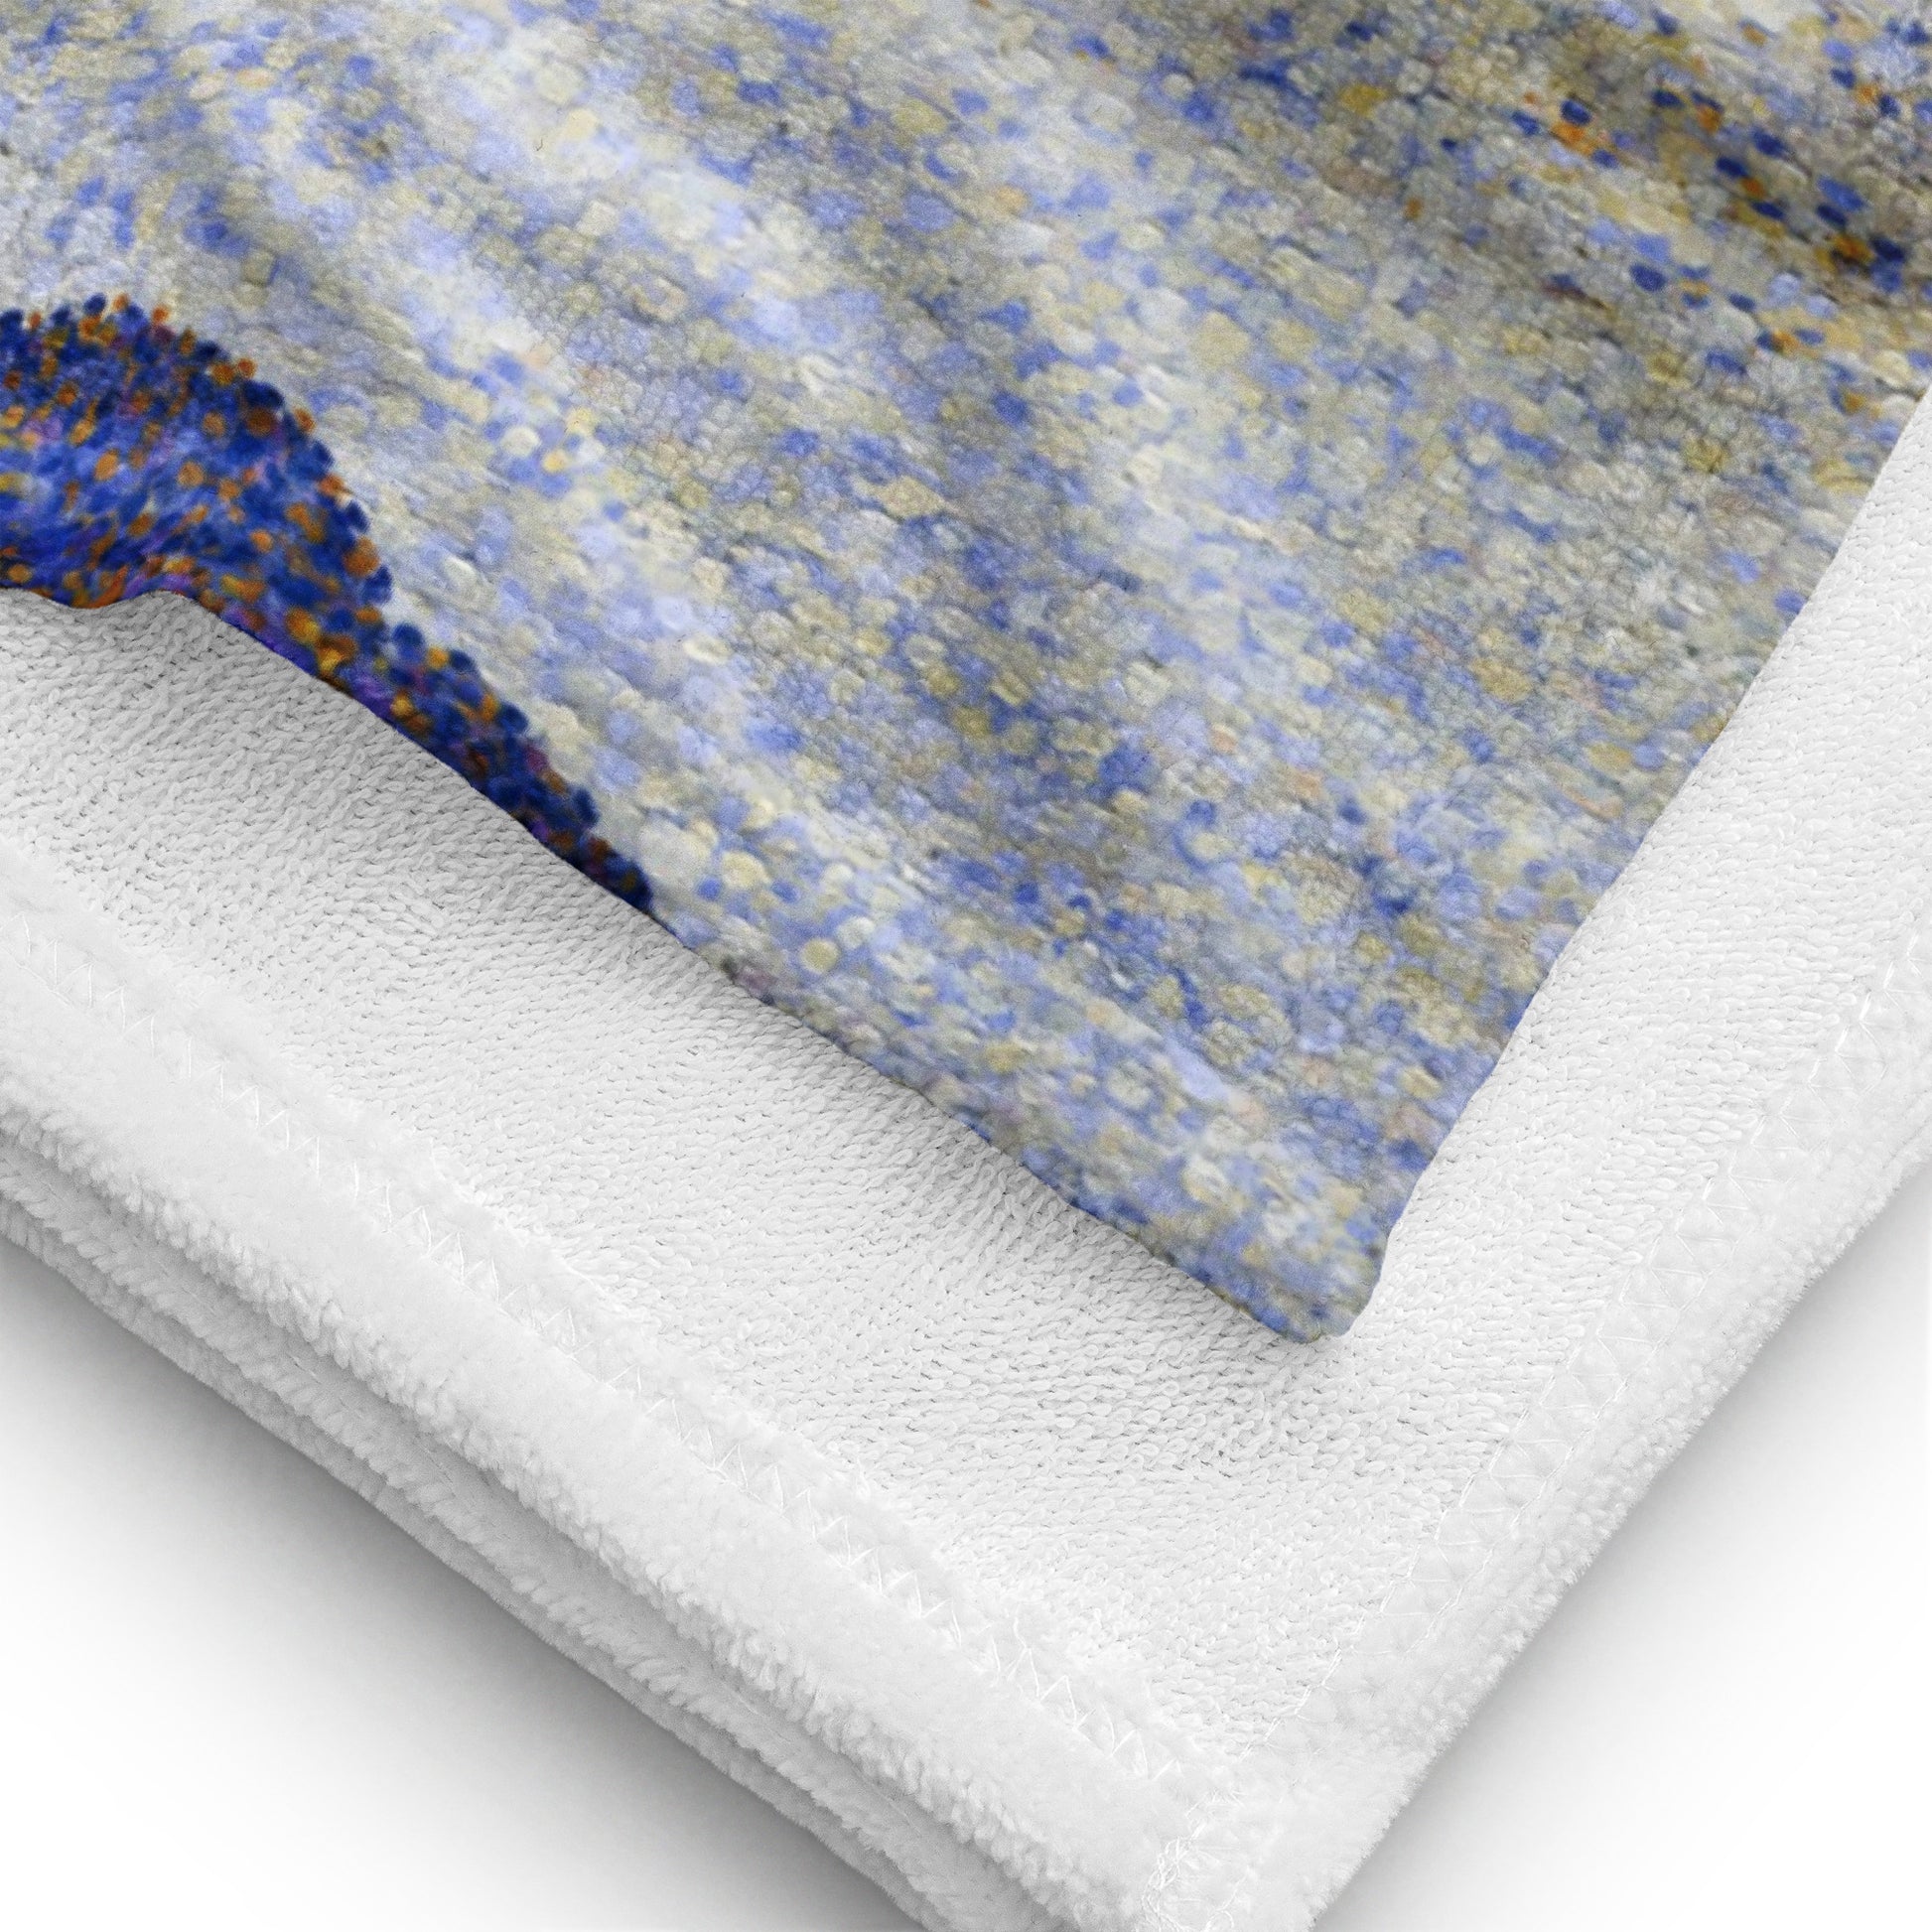 Close-up of corner of beach towel featuring painting 'Evening calm, Concarneau' by Paul Signac, showing detail of picture and texture of fabric.